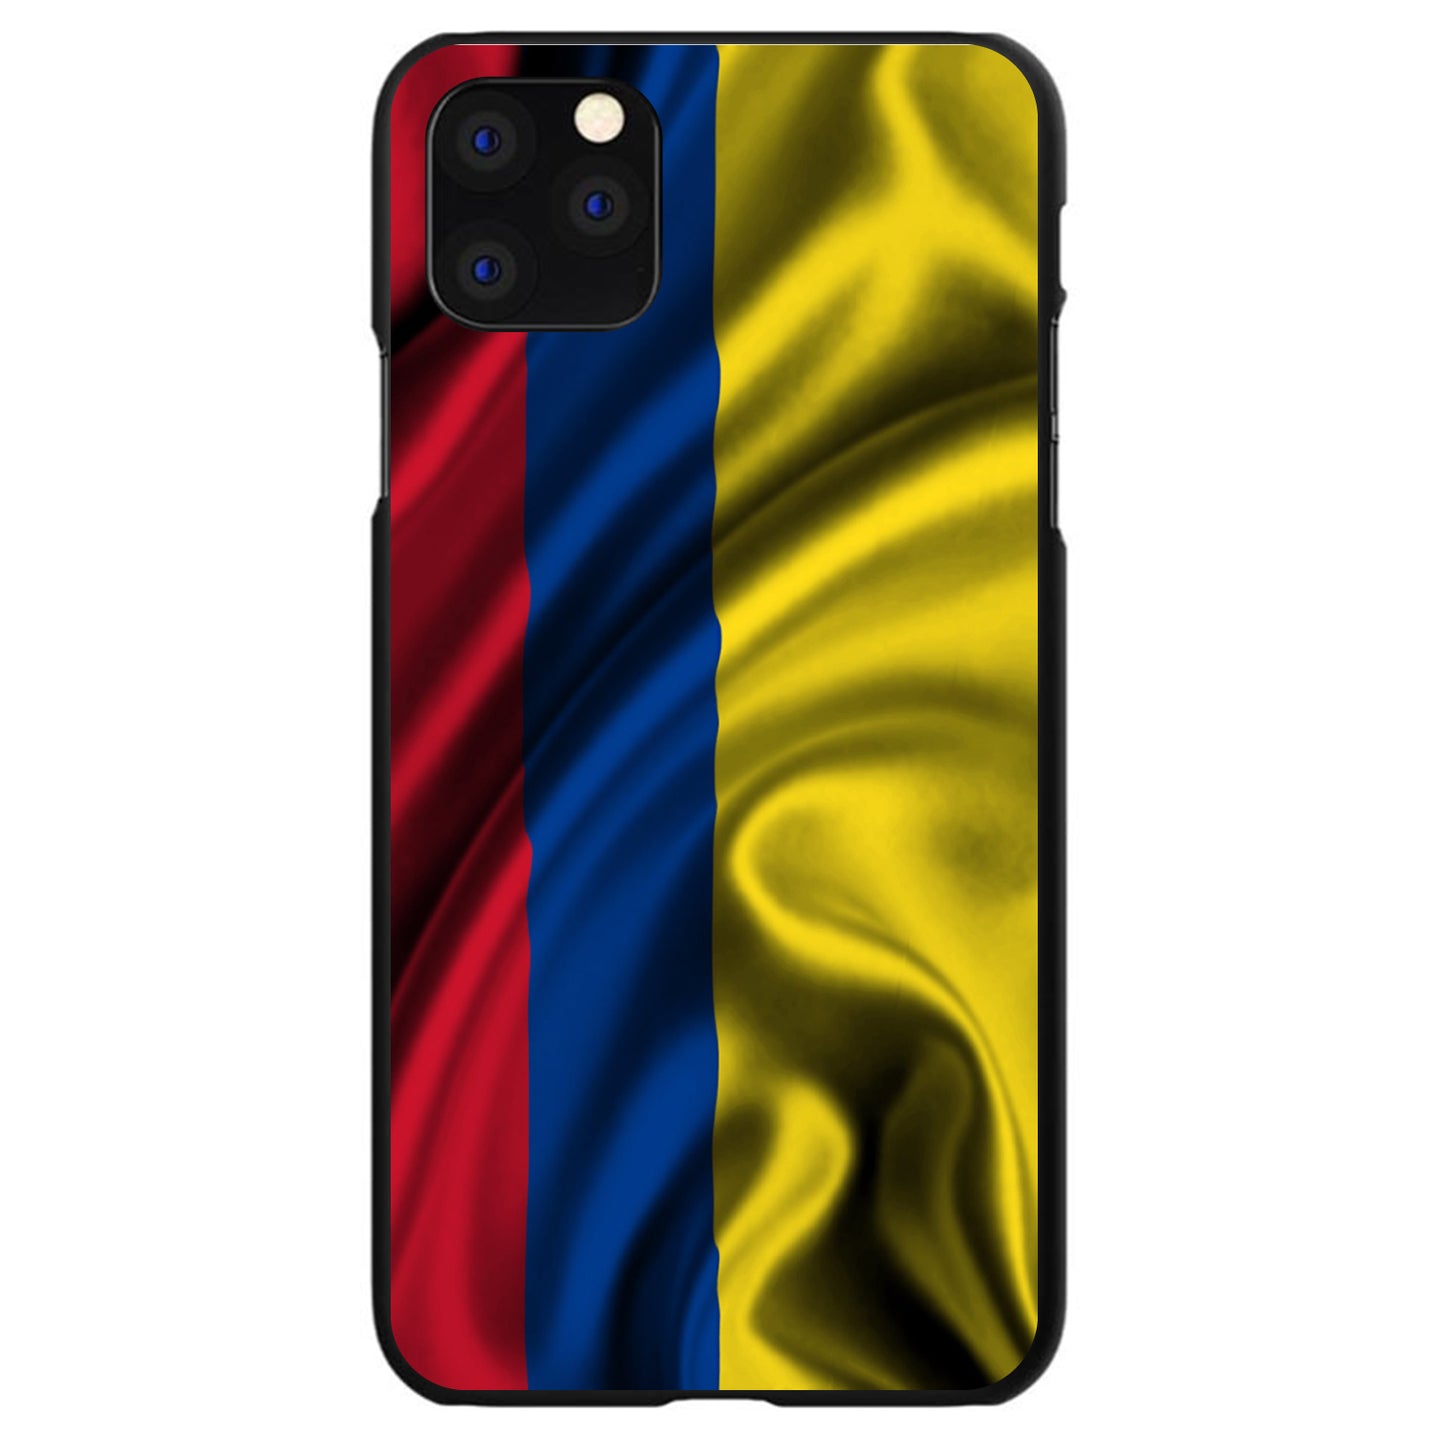 DistinctInk® Hard Plastic Snap-On Case for Apple iPhone or Samsung Galaxy - Colombia Waving Flag